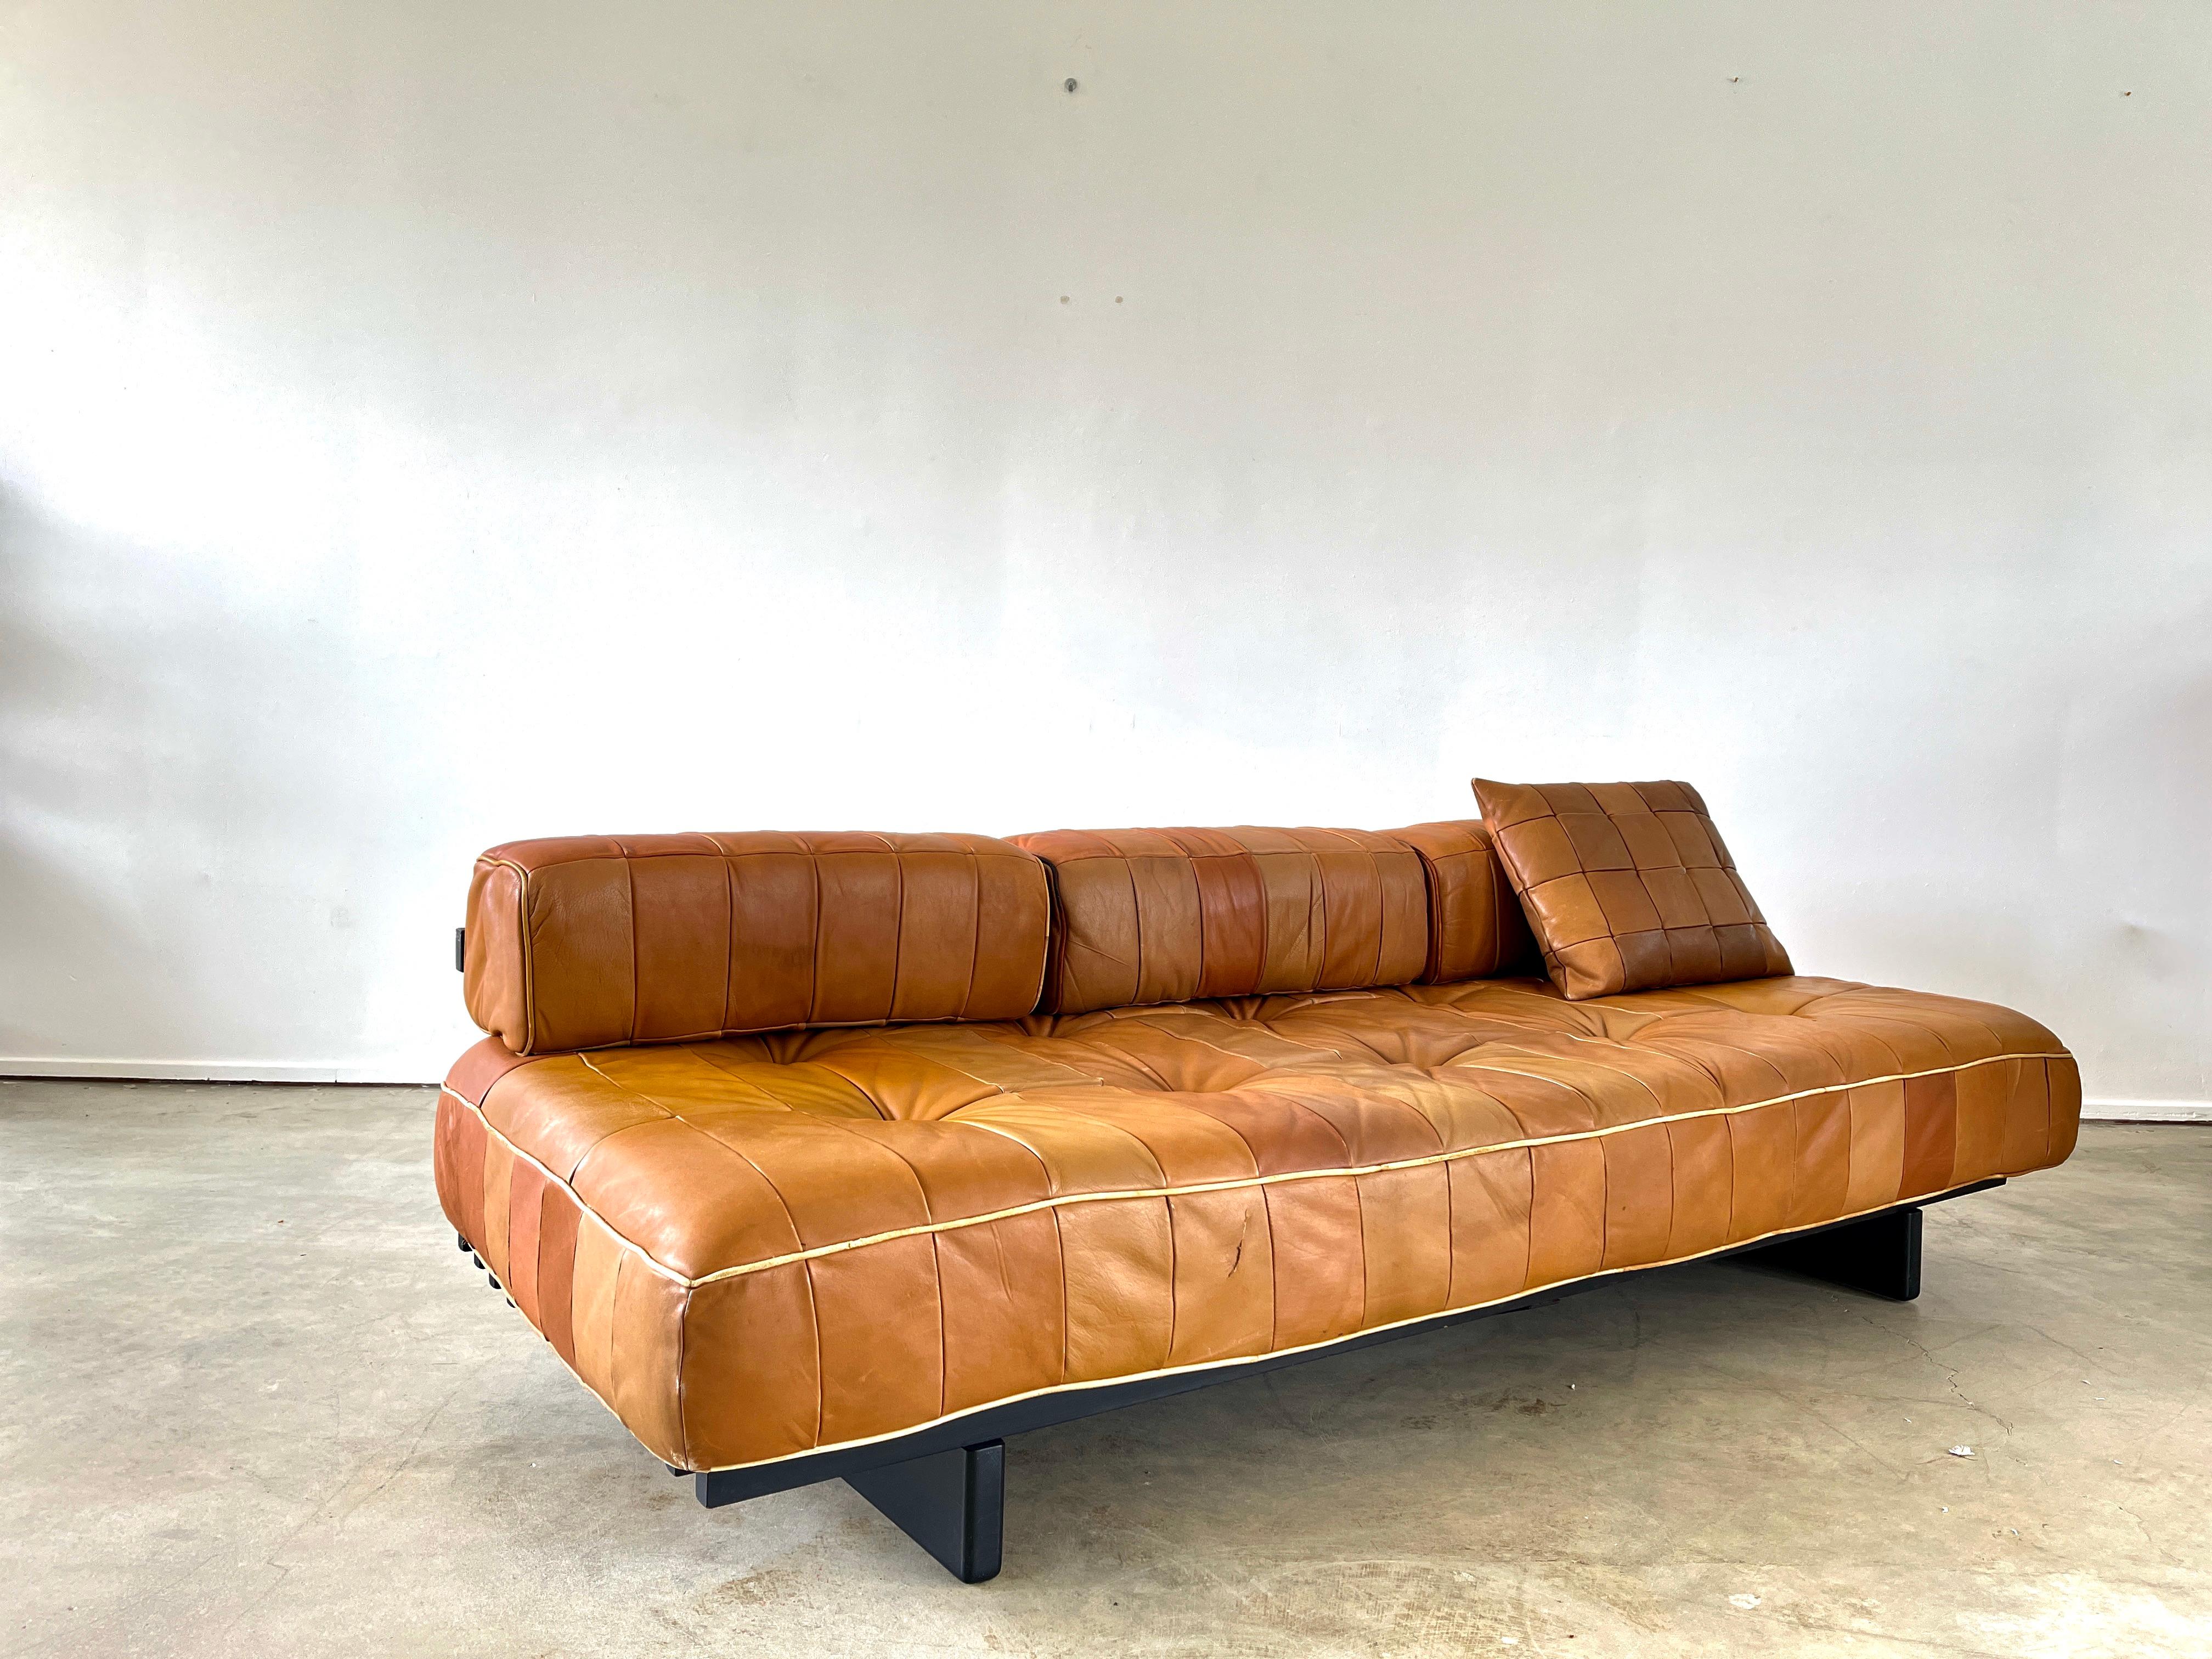 De Sede daybed DS 80 in camel leather with original pillows.
Signature patchwork leather has wonderful patina and sits on a slatted bench.
Slatted black wood frame.